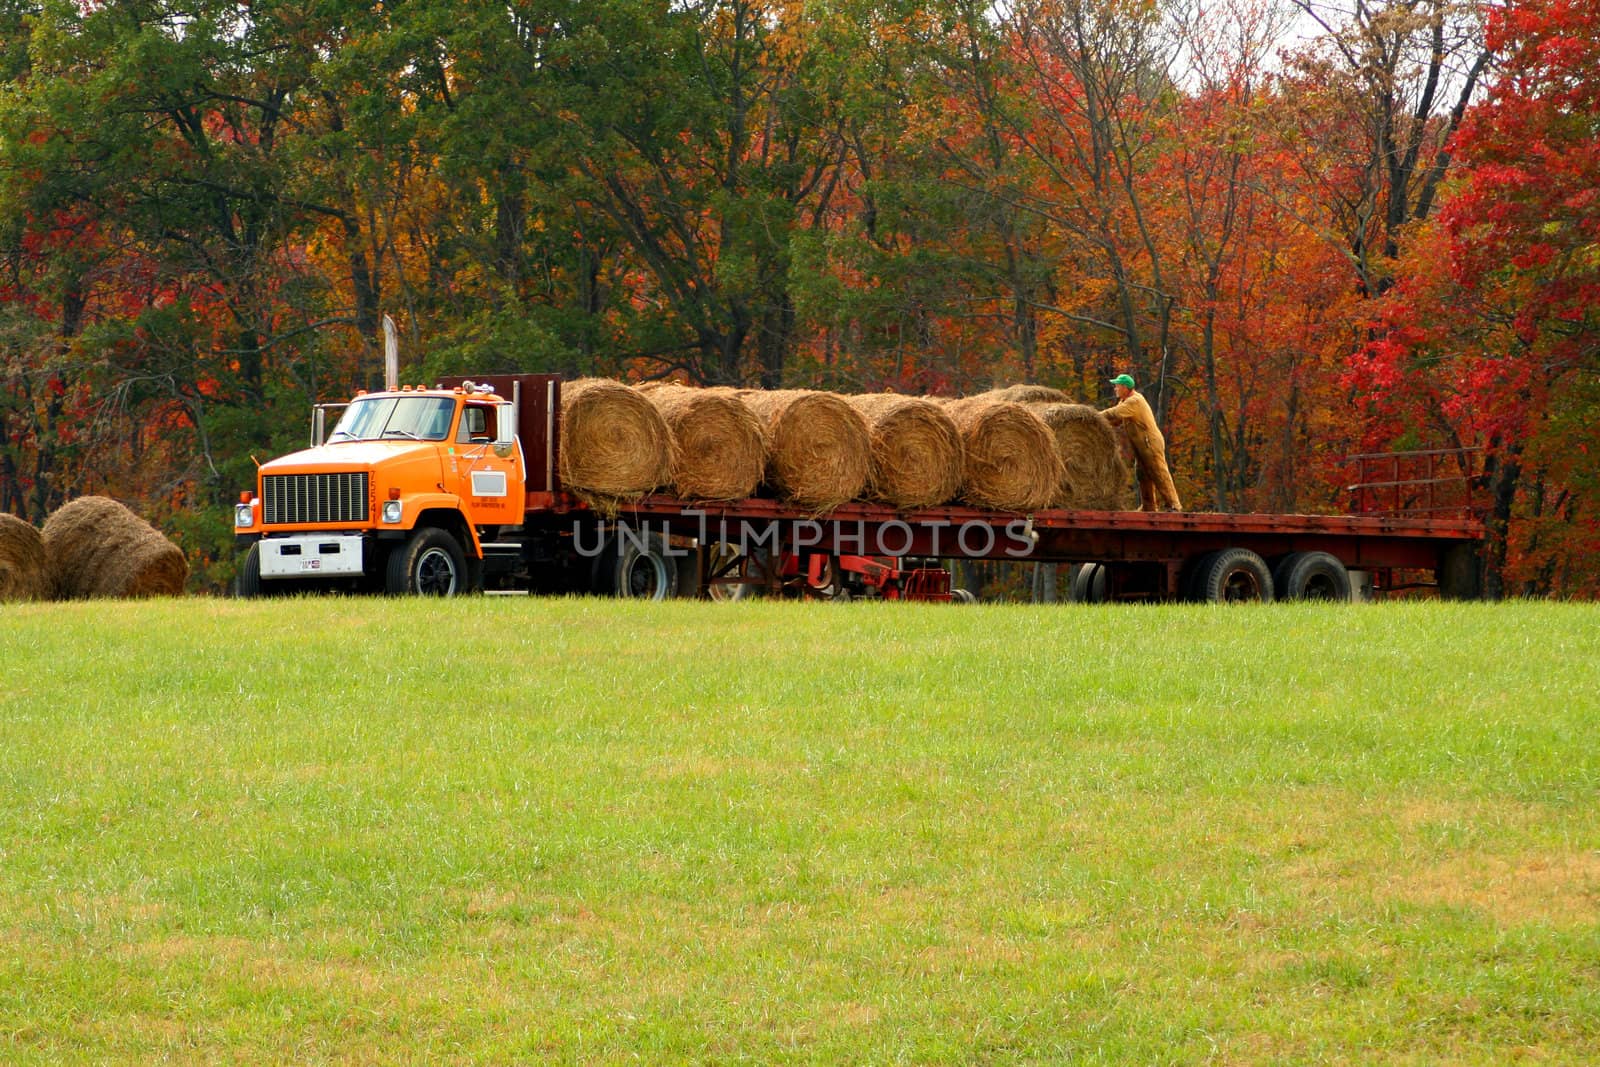 Man working to get hay up and ready for winter